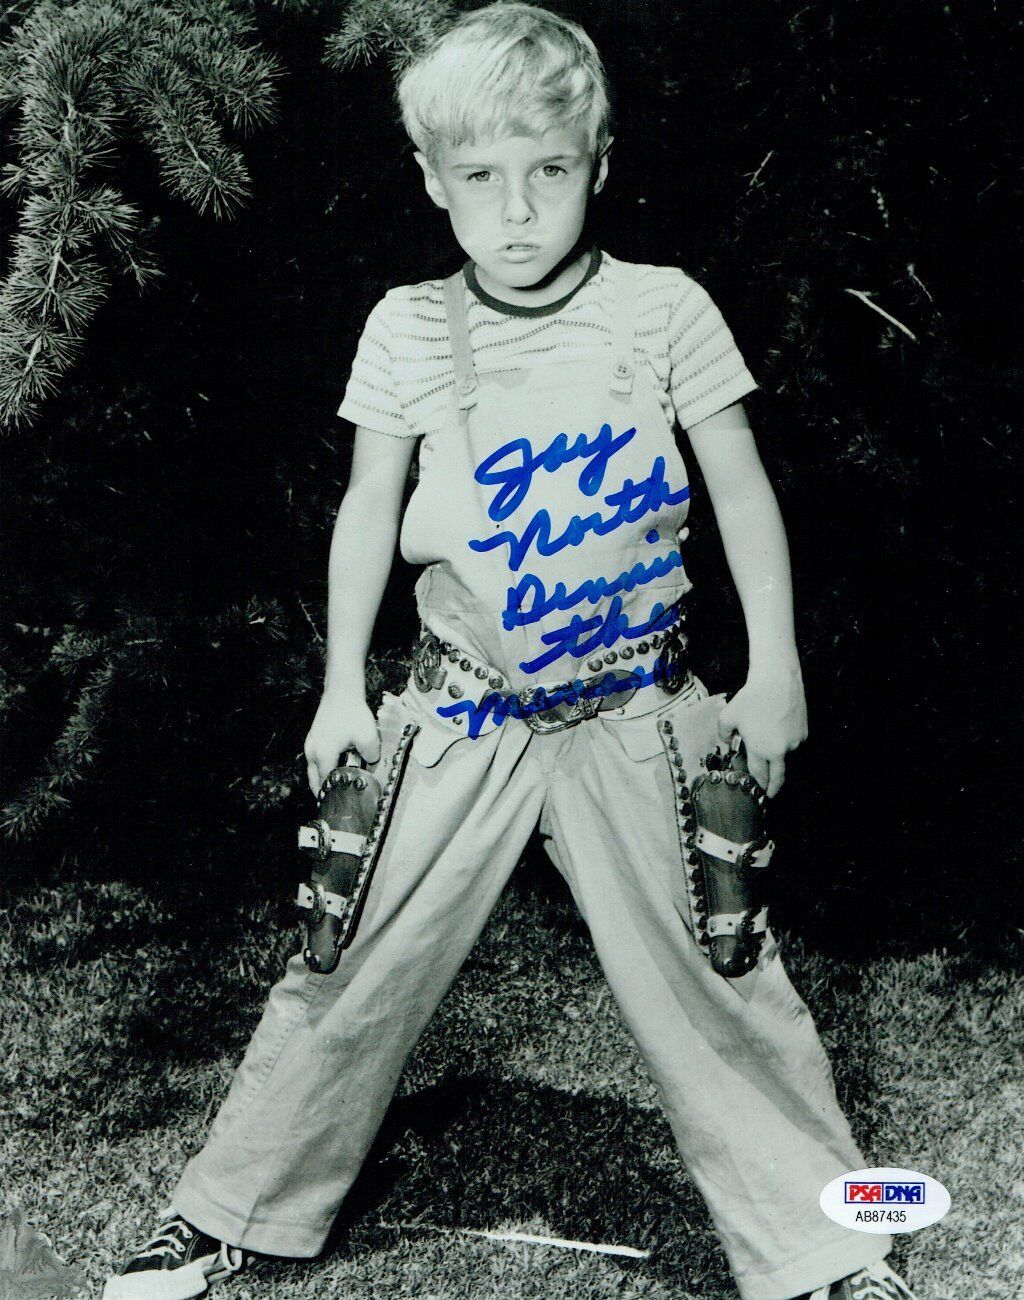 Jay North Signed Dennis the Menace Autographed 8x10 B/W Photo Poster painting PSA/DNA #AB87435